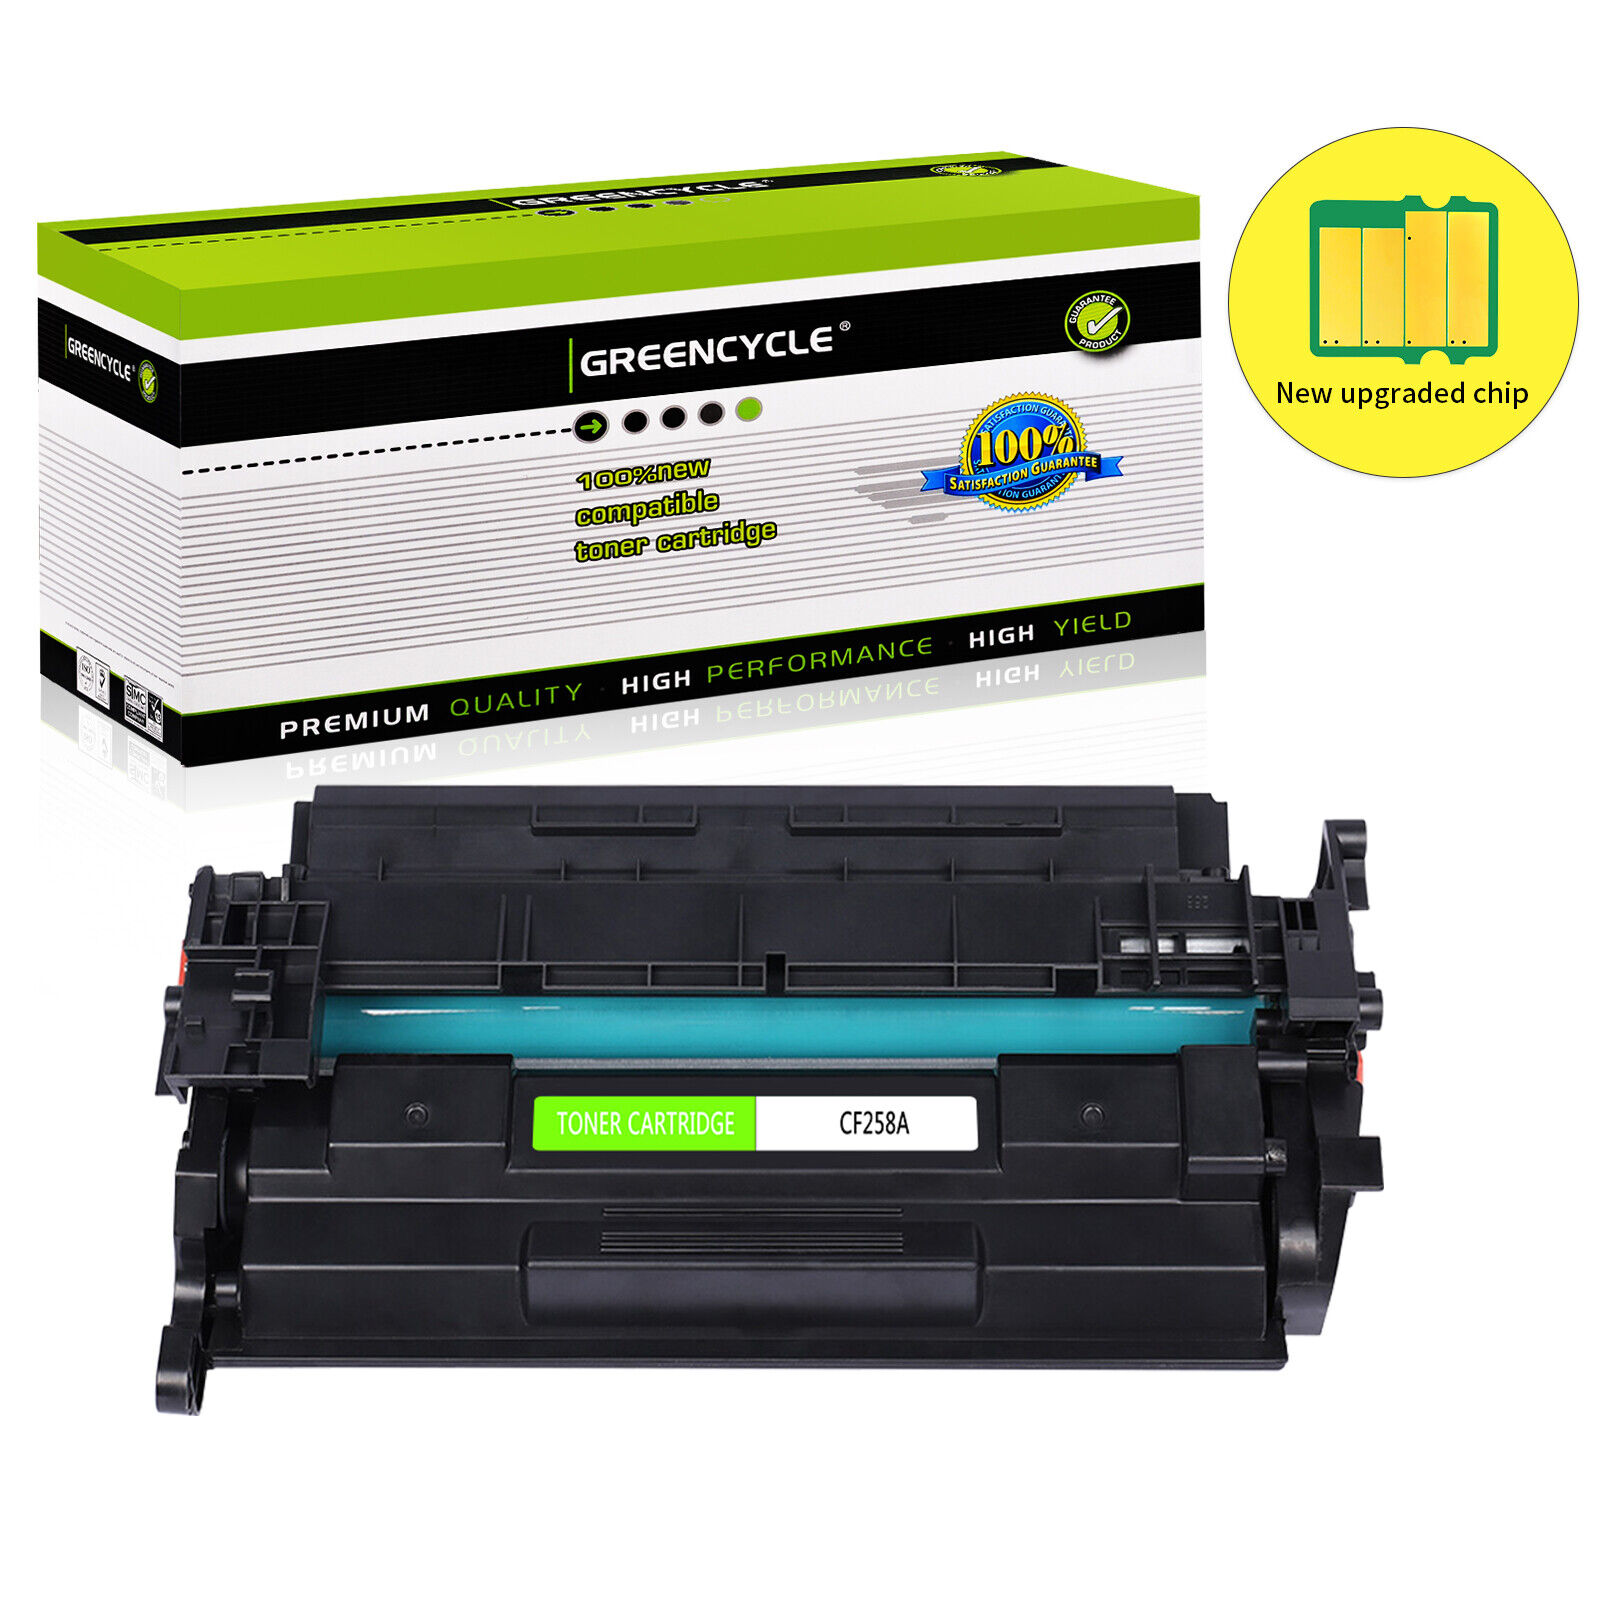 GREENCYCLE CF258A Toner Lot for HP LaserJet M404n M404dw MFP M428fdn with Chip